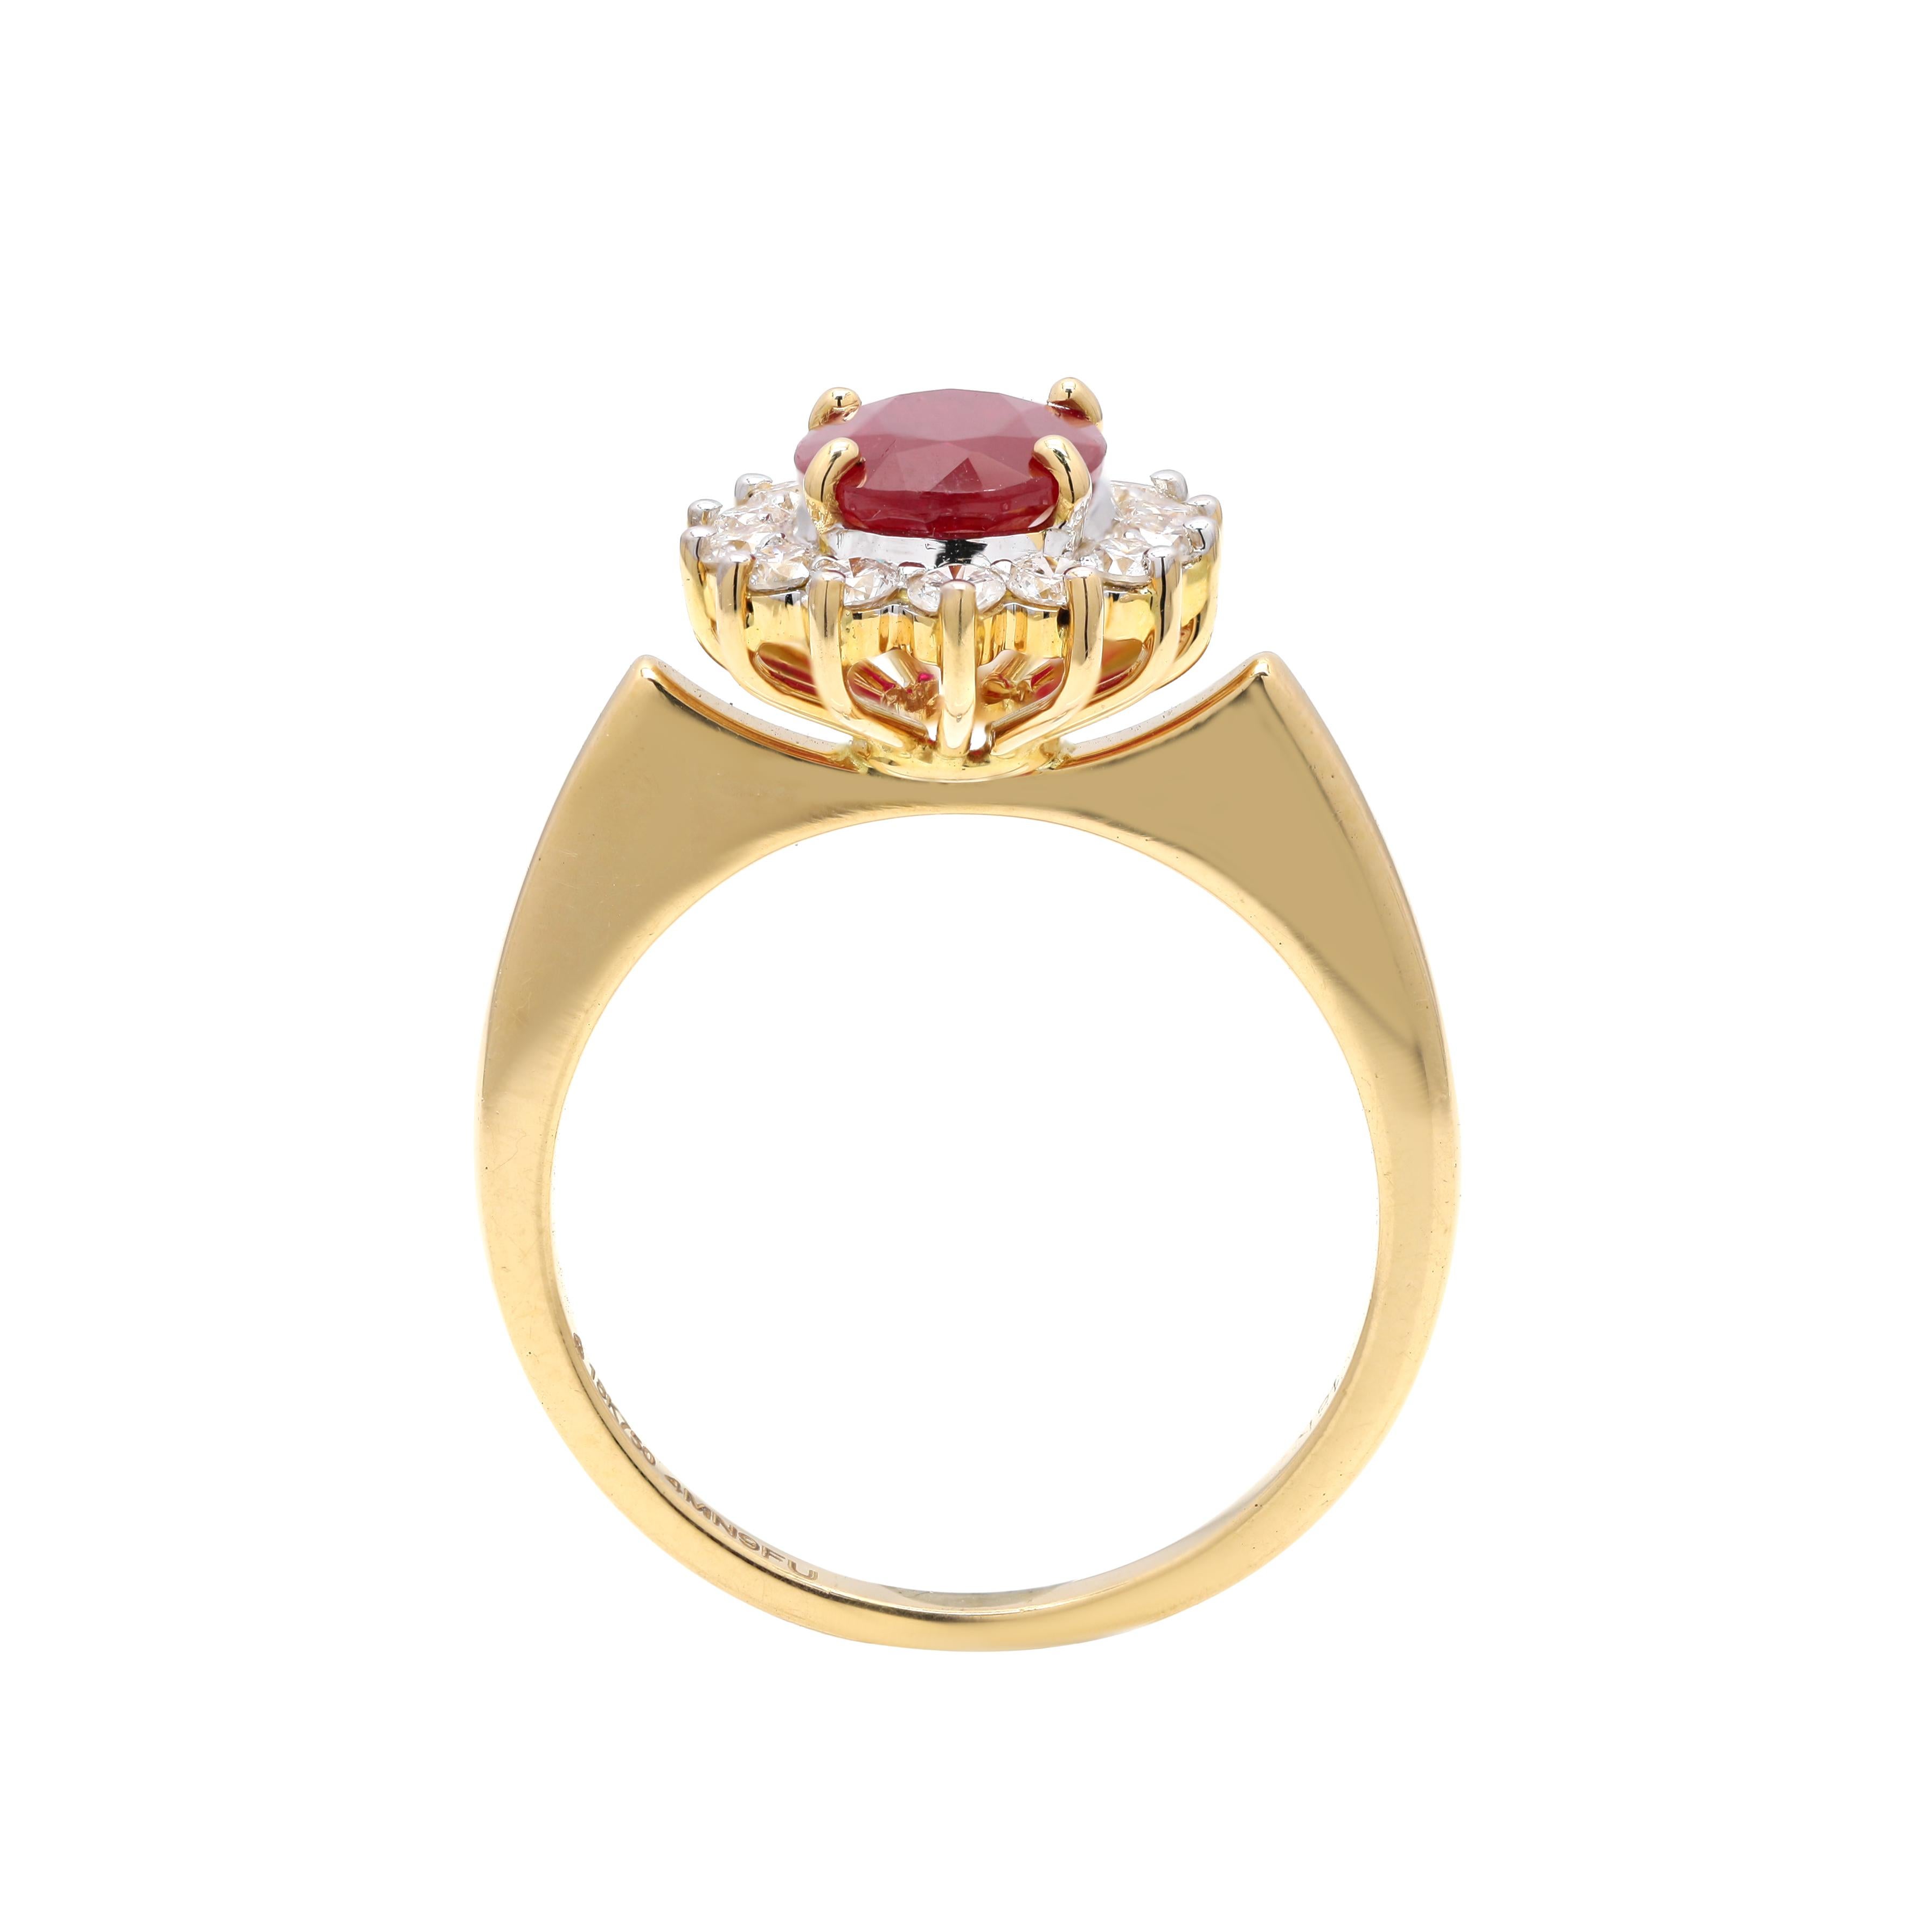 For Sale:  1.83 Carats Deep Red Ruby and Halo Diamond Ring 18k Solid Yellow Gold 4